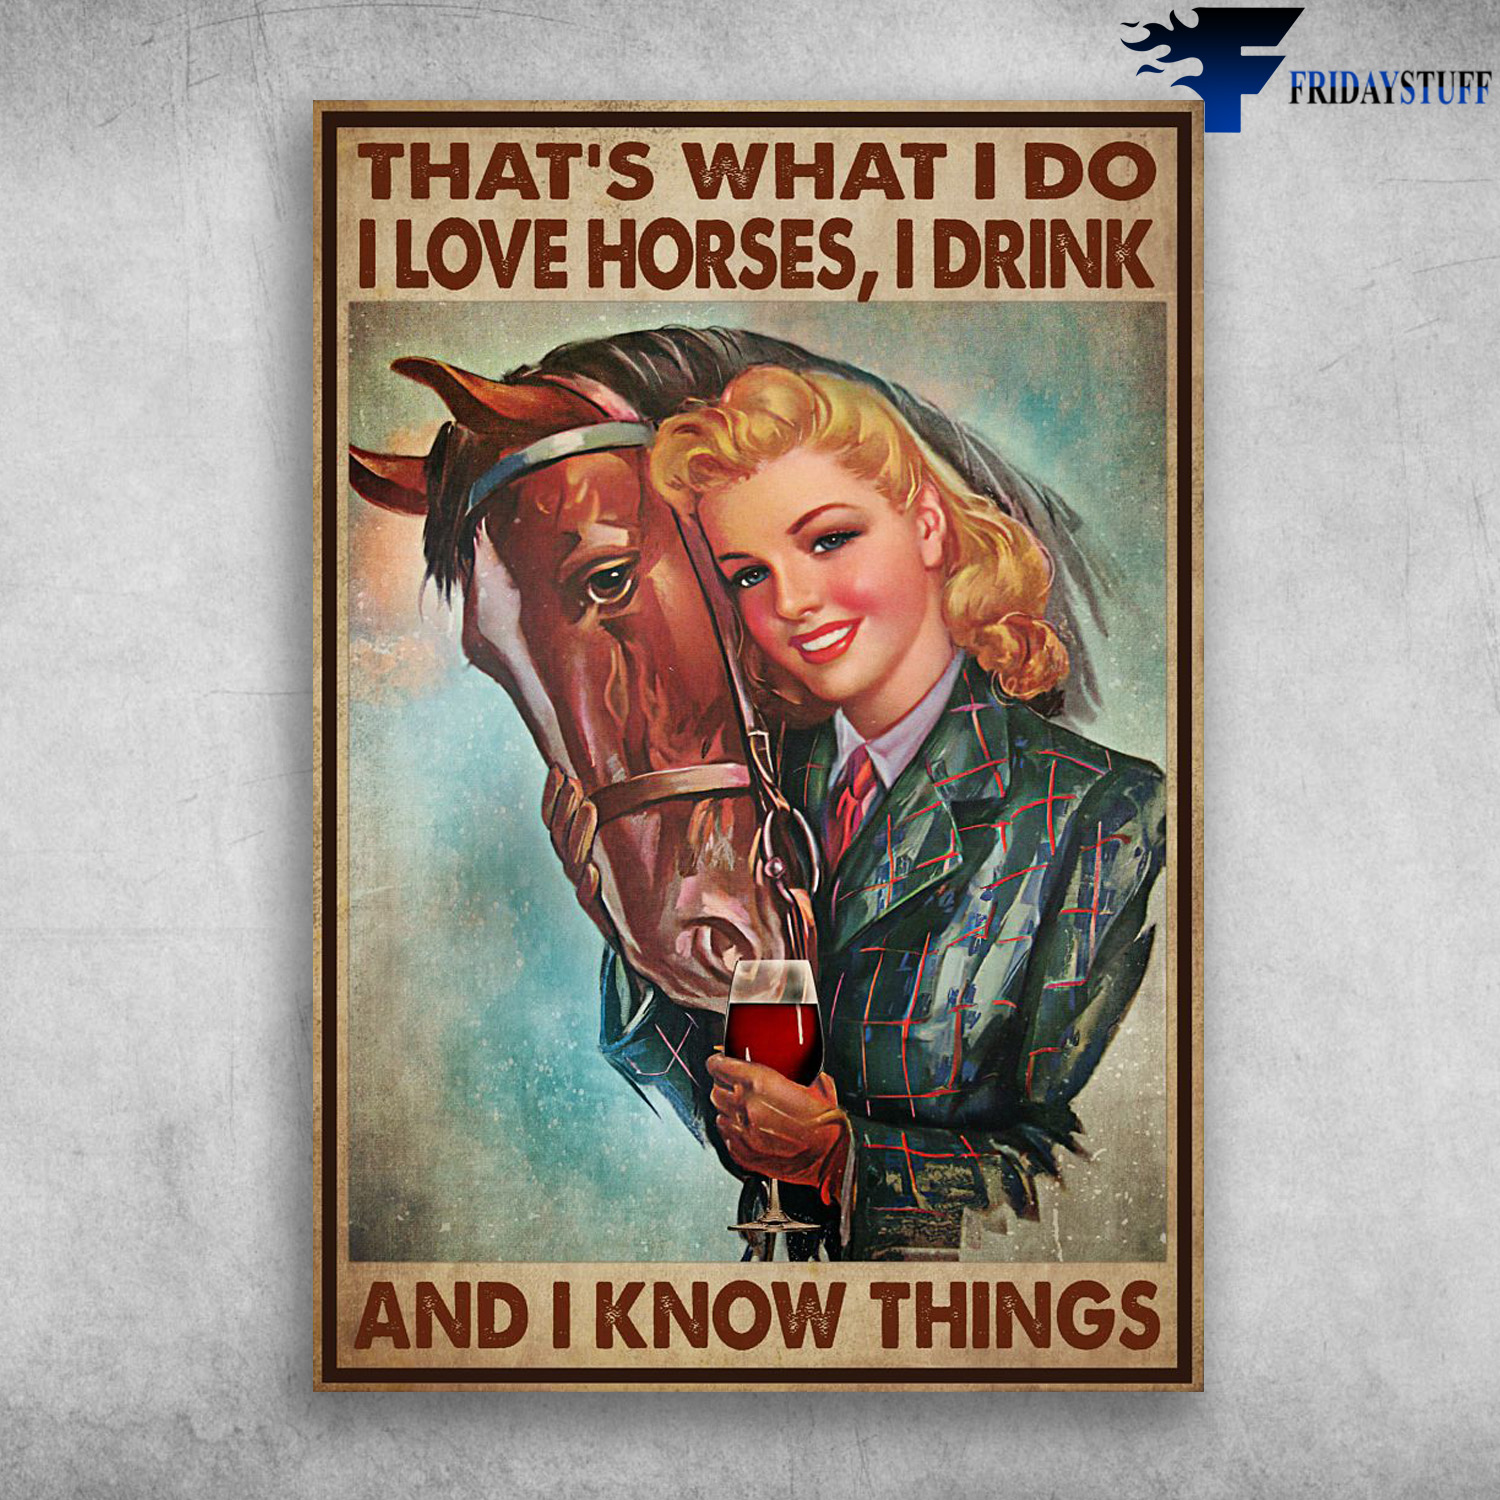 Girl Loves Wine And Horse - That's What I Do, I Love Horses, I Drink, And I Know Things